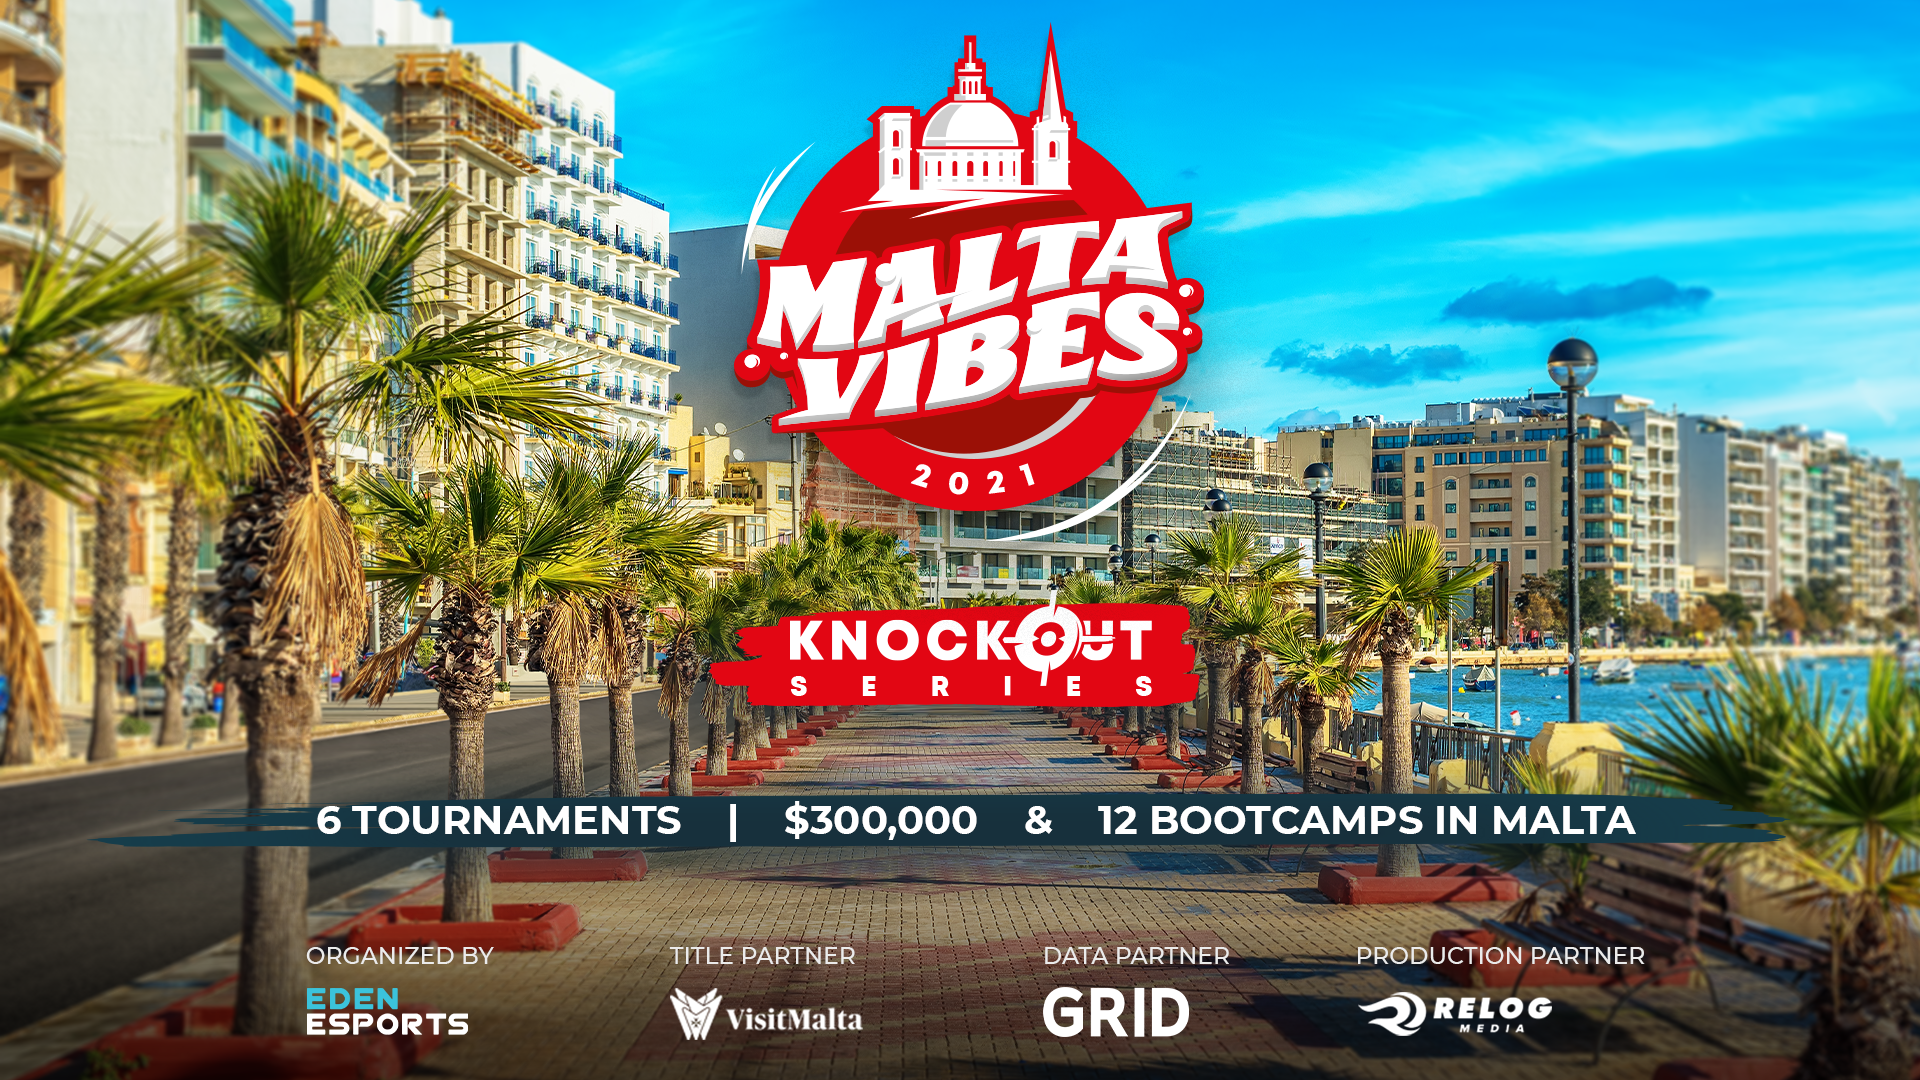 GRID secures data rights deal for Malta Vibes events thumbnail